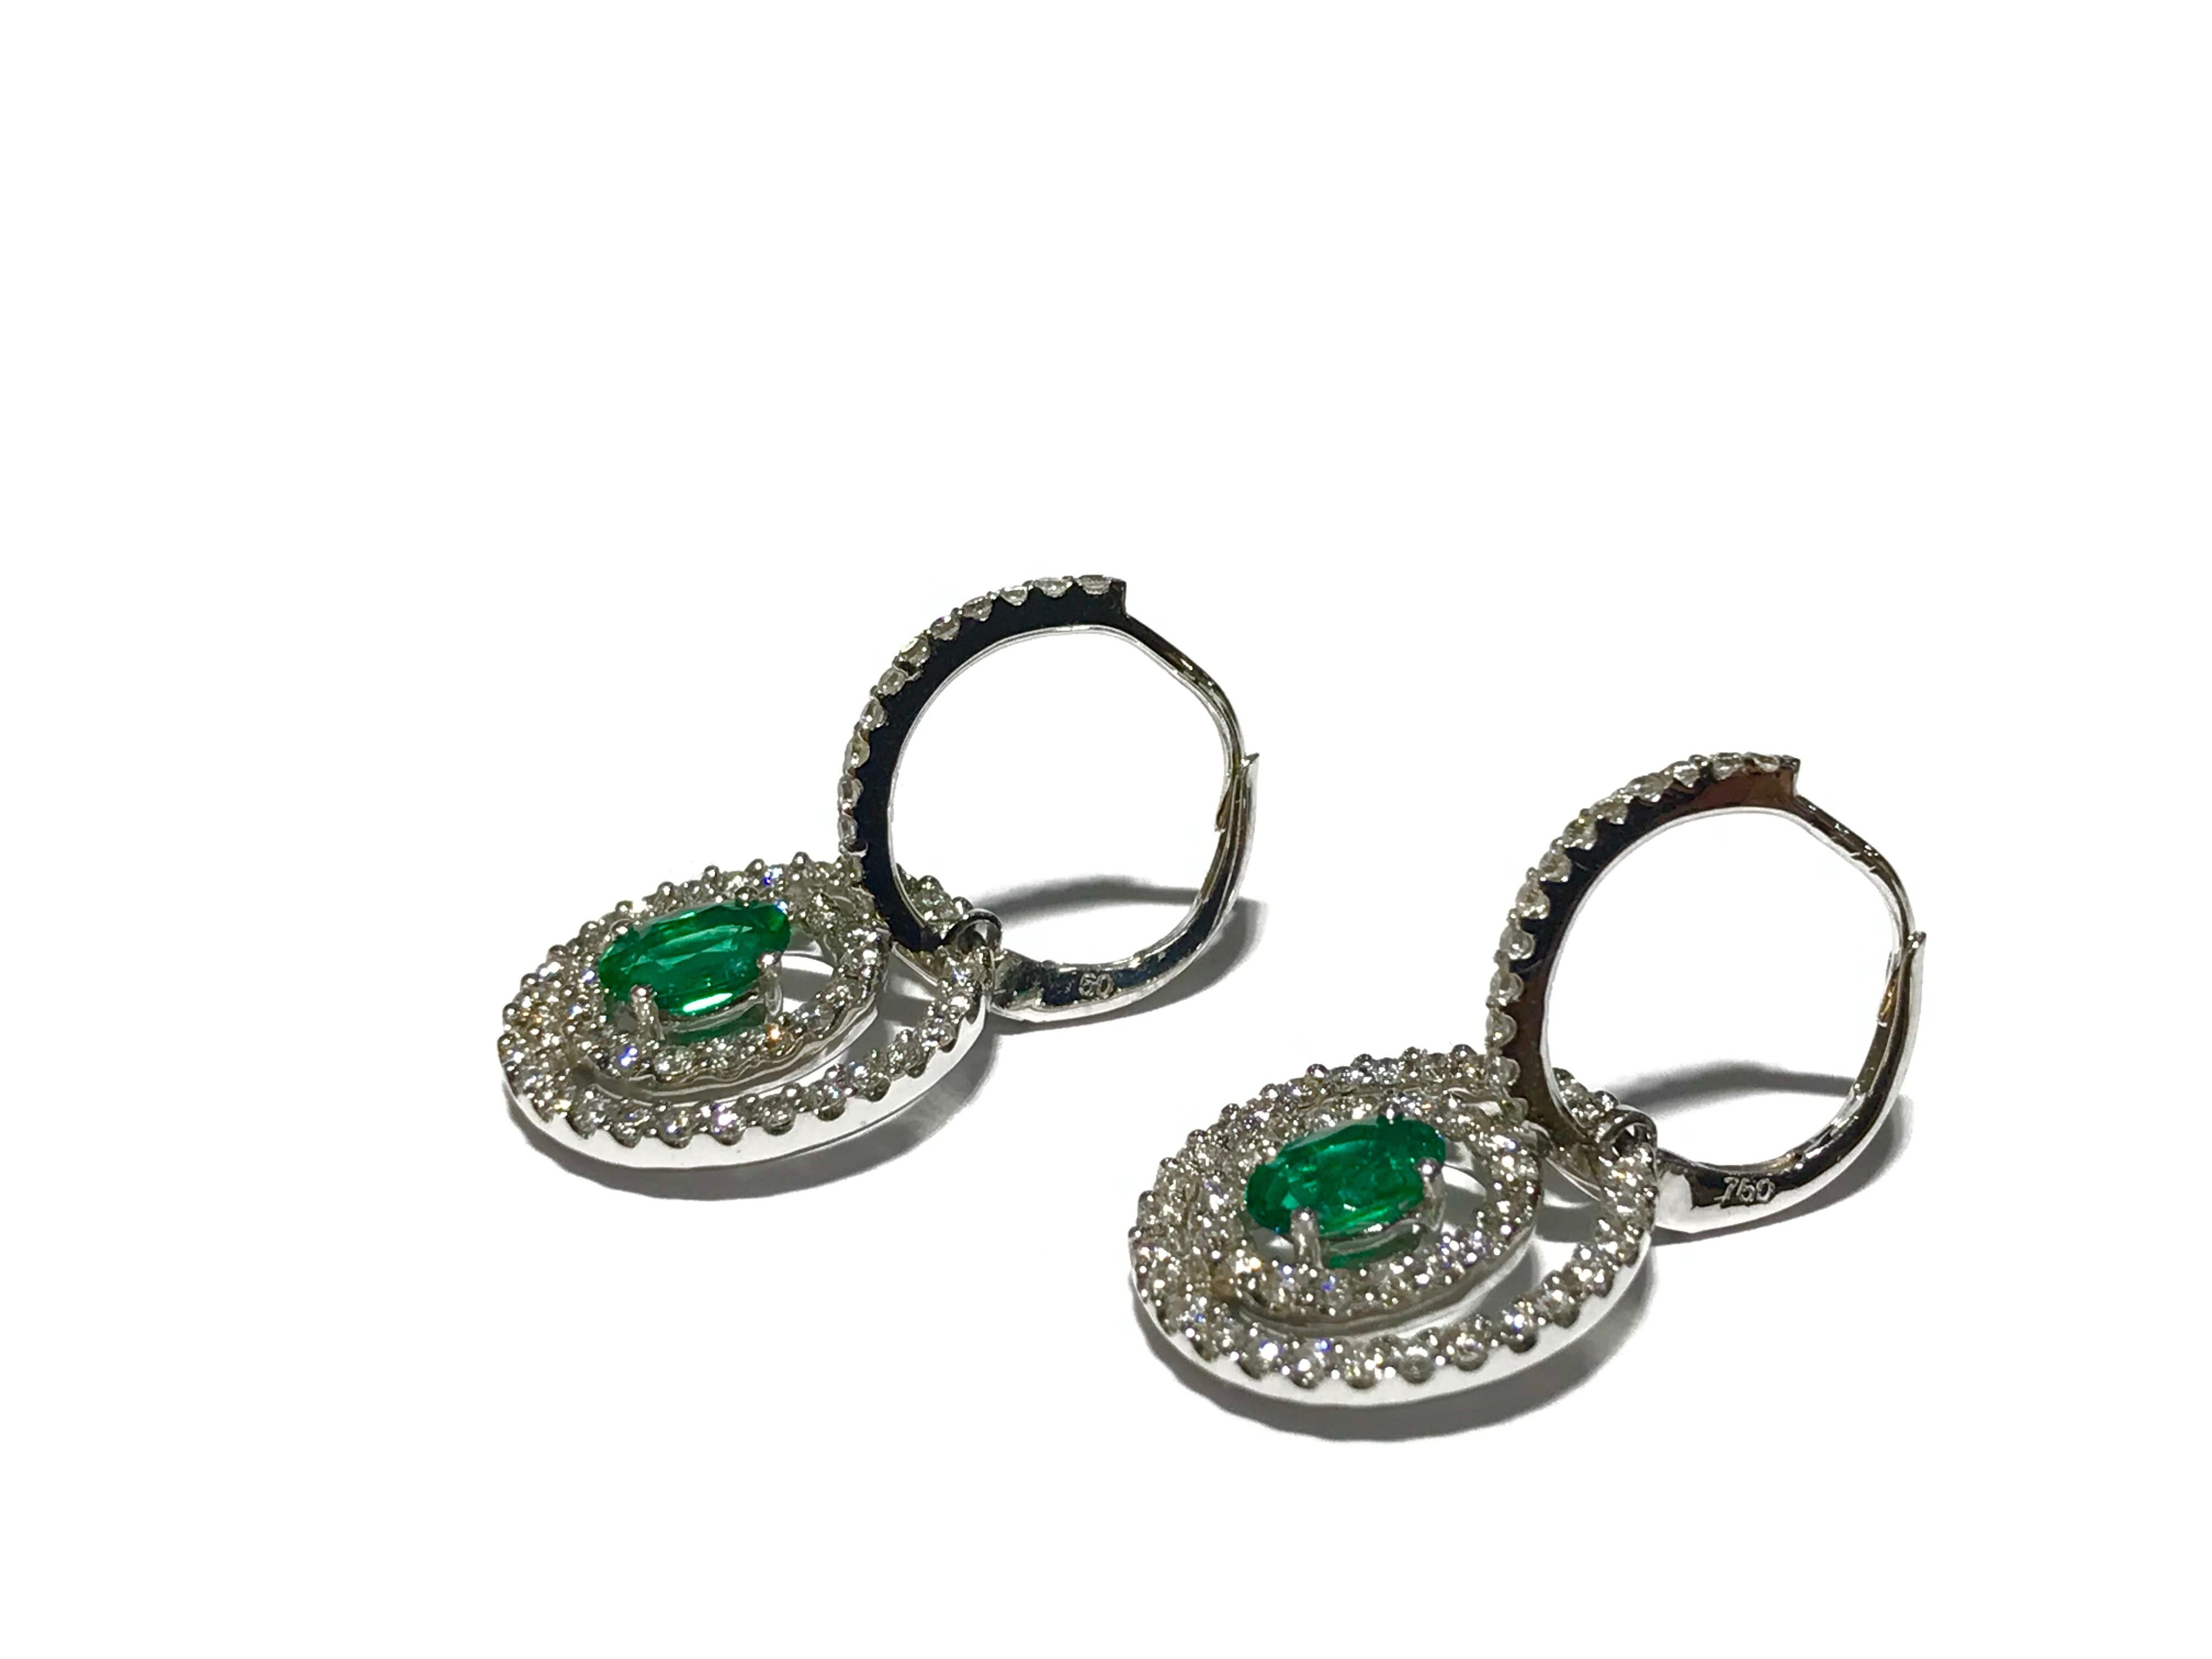 Crivelli Emerald and Diamond Earrings Drop Style in 18 Karat White Gold In New Condition For Sale In Toronto, Ontario